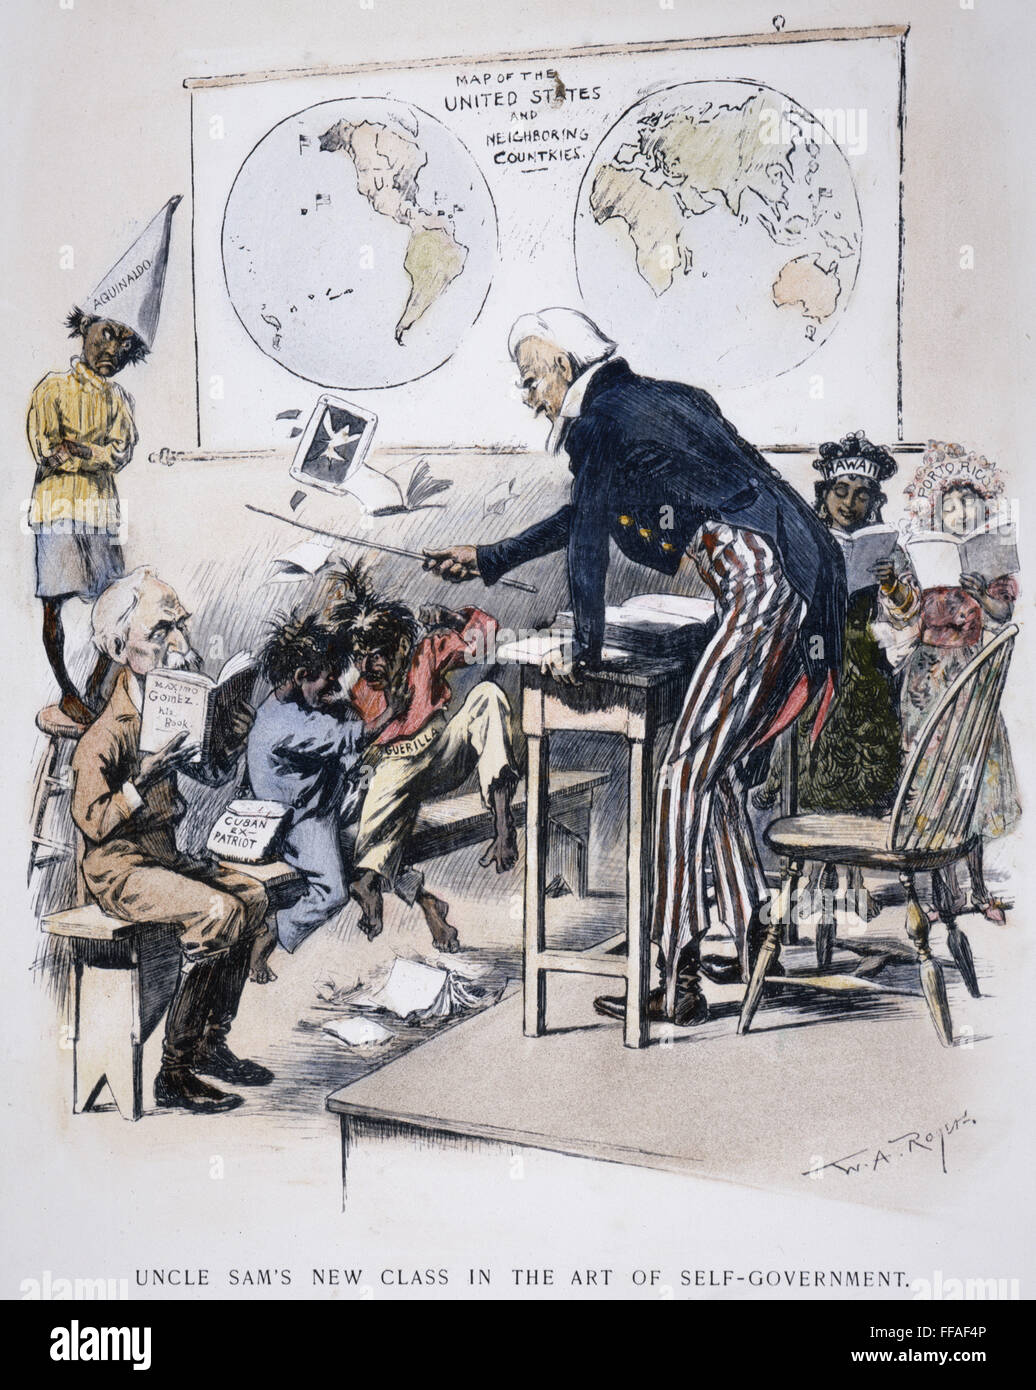 SPANISH-AMERICAN WAR CART. /nThe United States, in the figure of Uncle Sam, the school teacher, corrects the independent behavior of the Philippines (Aguinaldo) and Cuba (Gomez): American cartoon by W.A. Rogers, 1898. Stock Photo